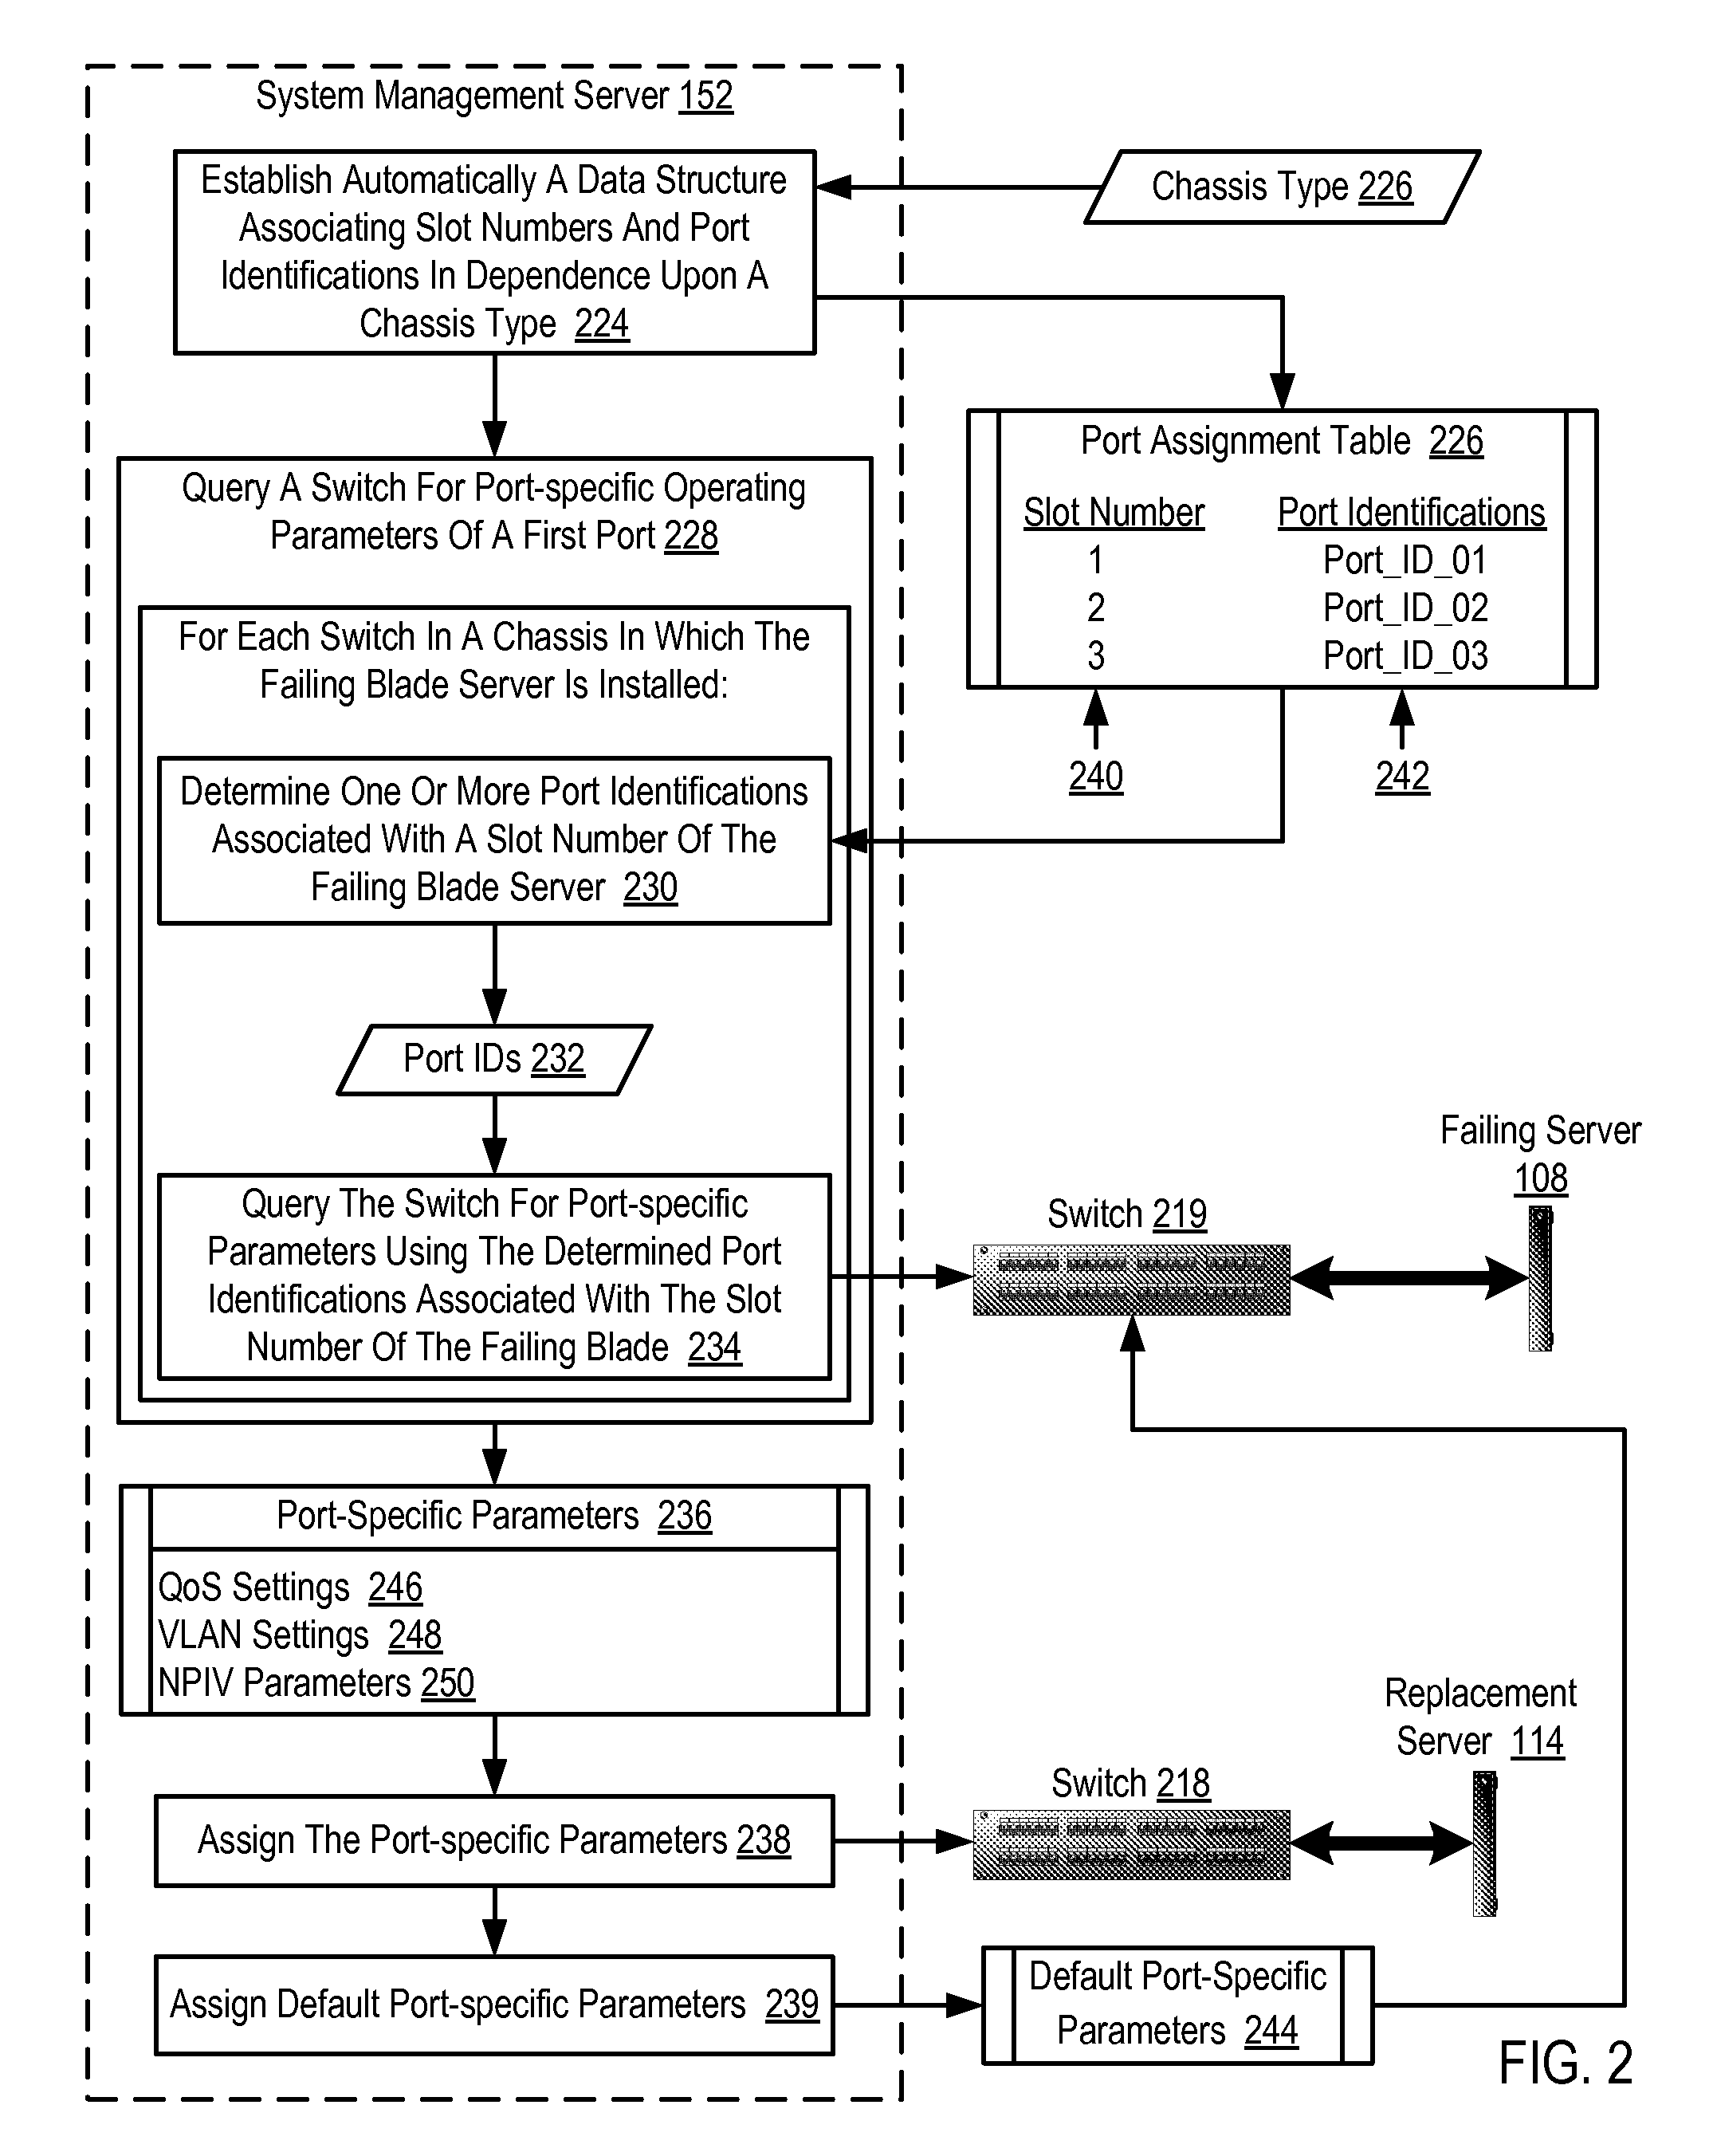 Migrating Port-Specific Operating Parameters During Blade Server Failover